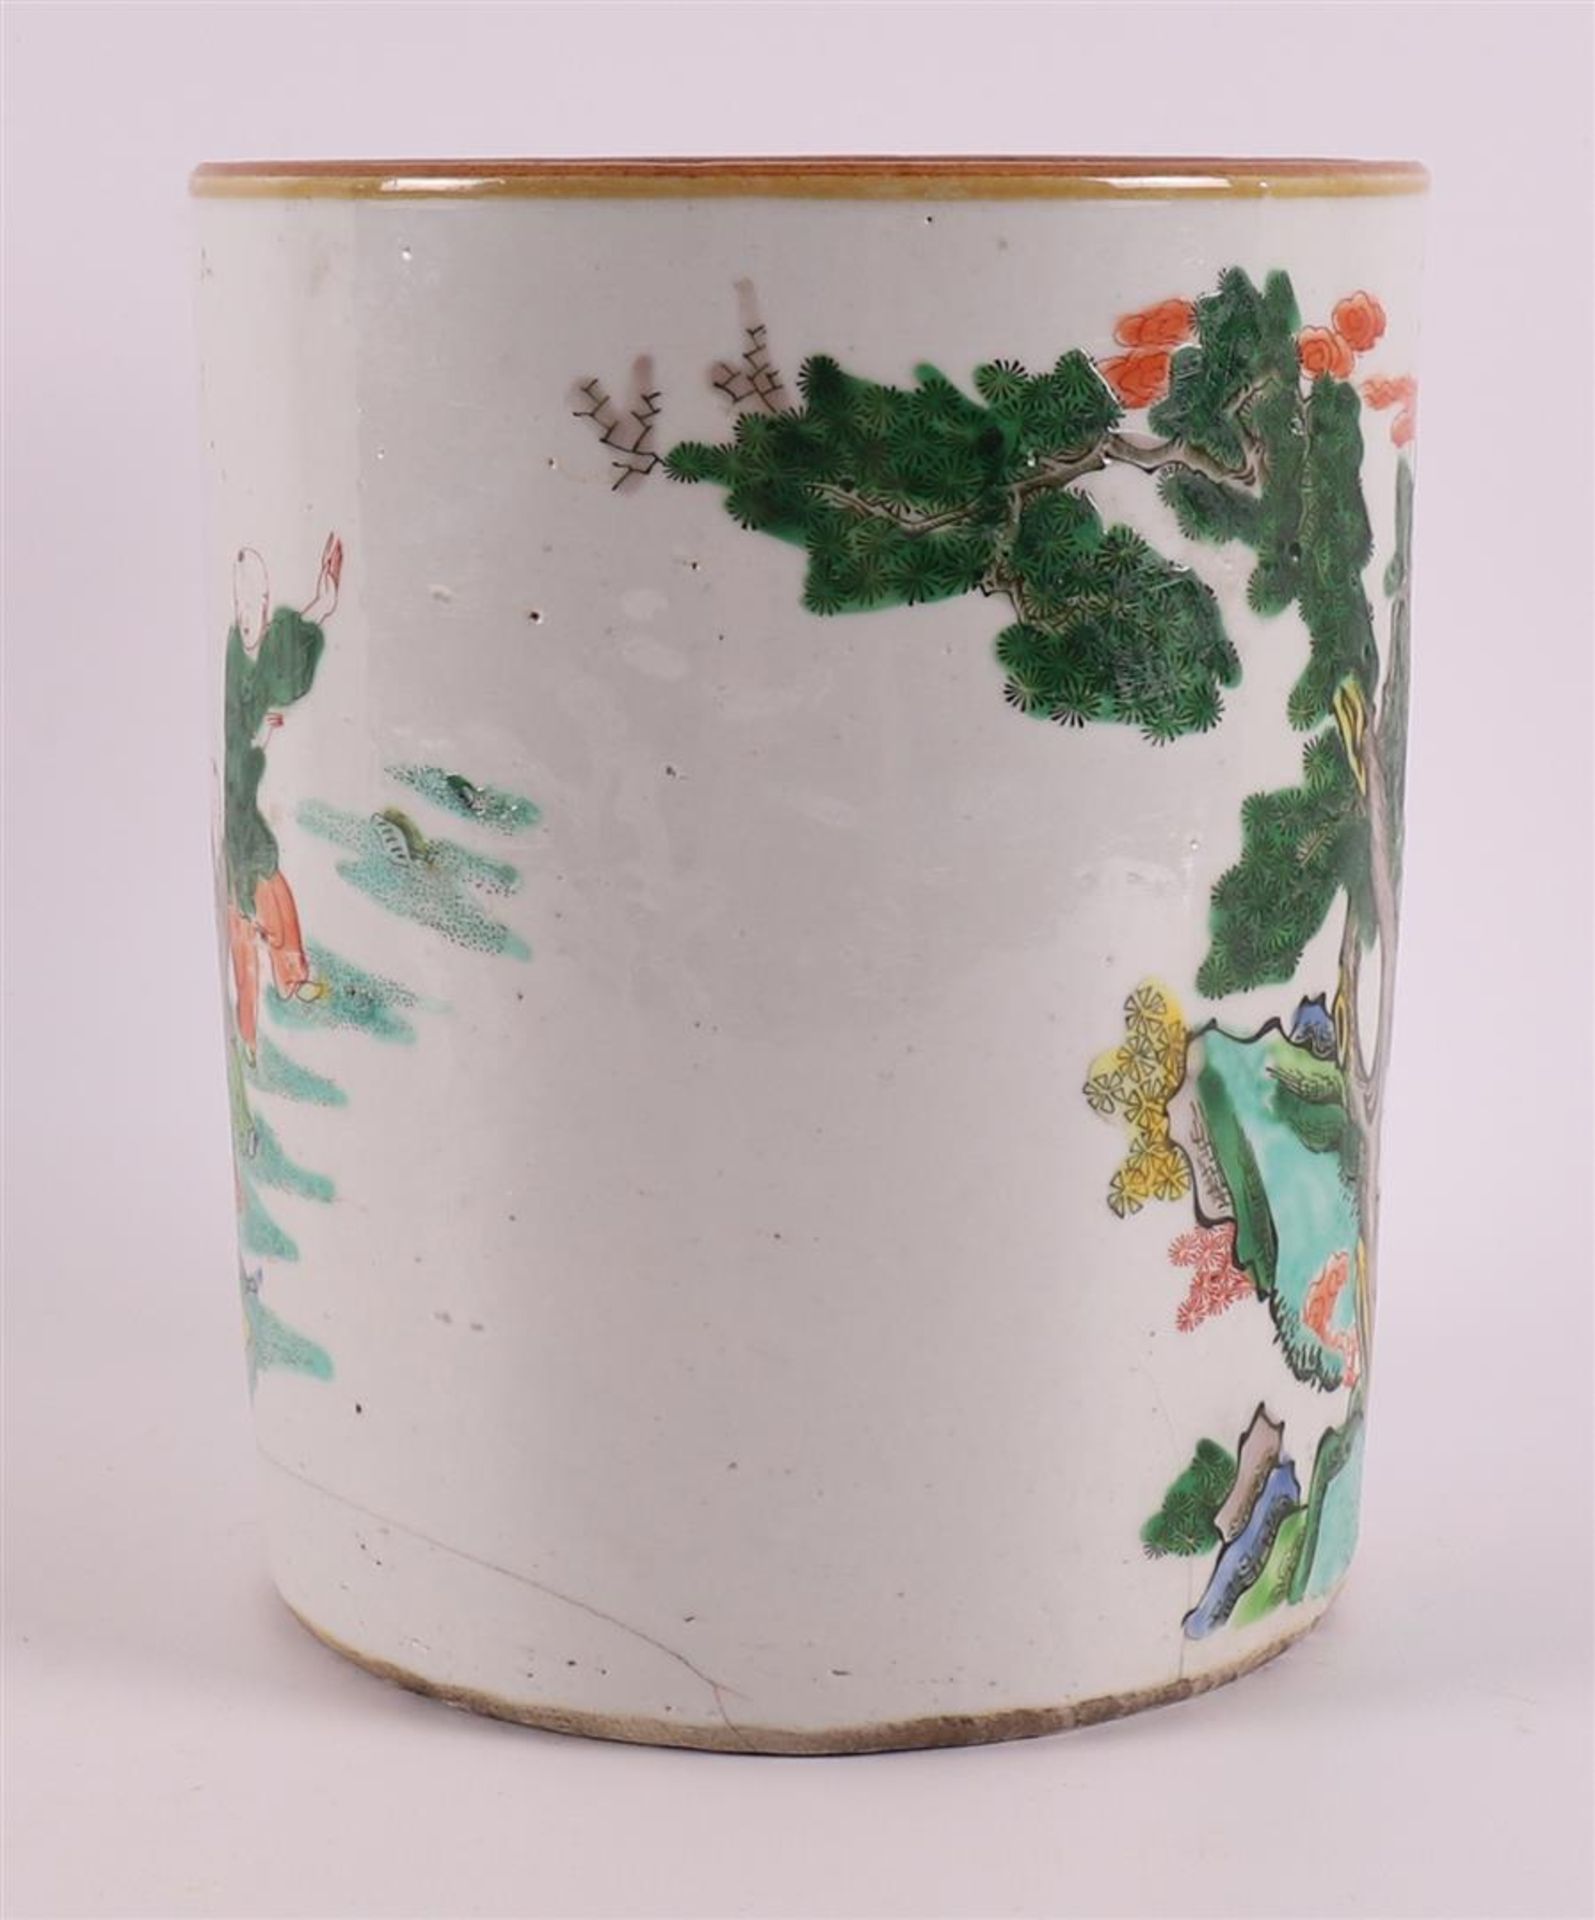 A cylindrical porcelain famille verte brush pot, China, late 19th century - Image 2 of 8